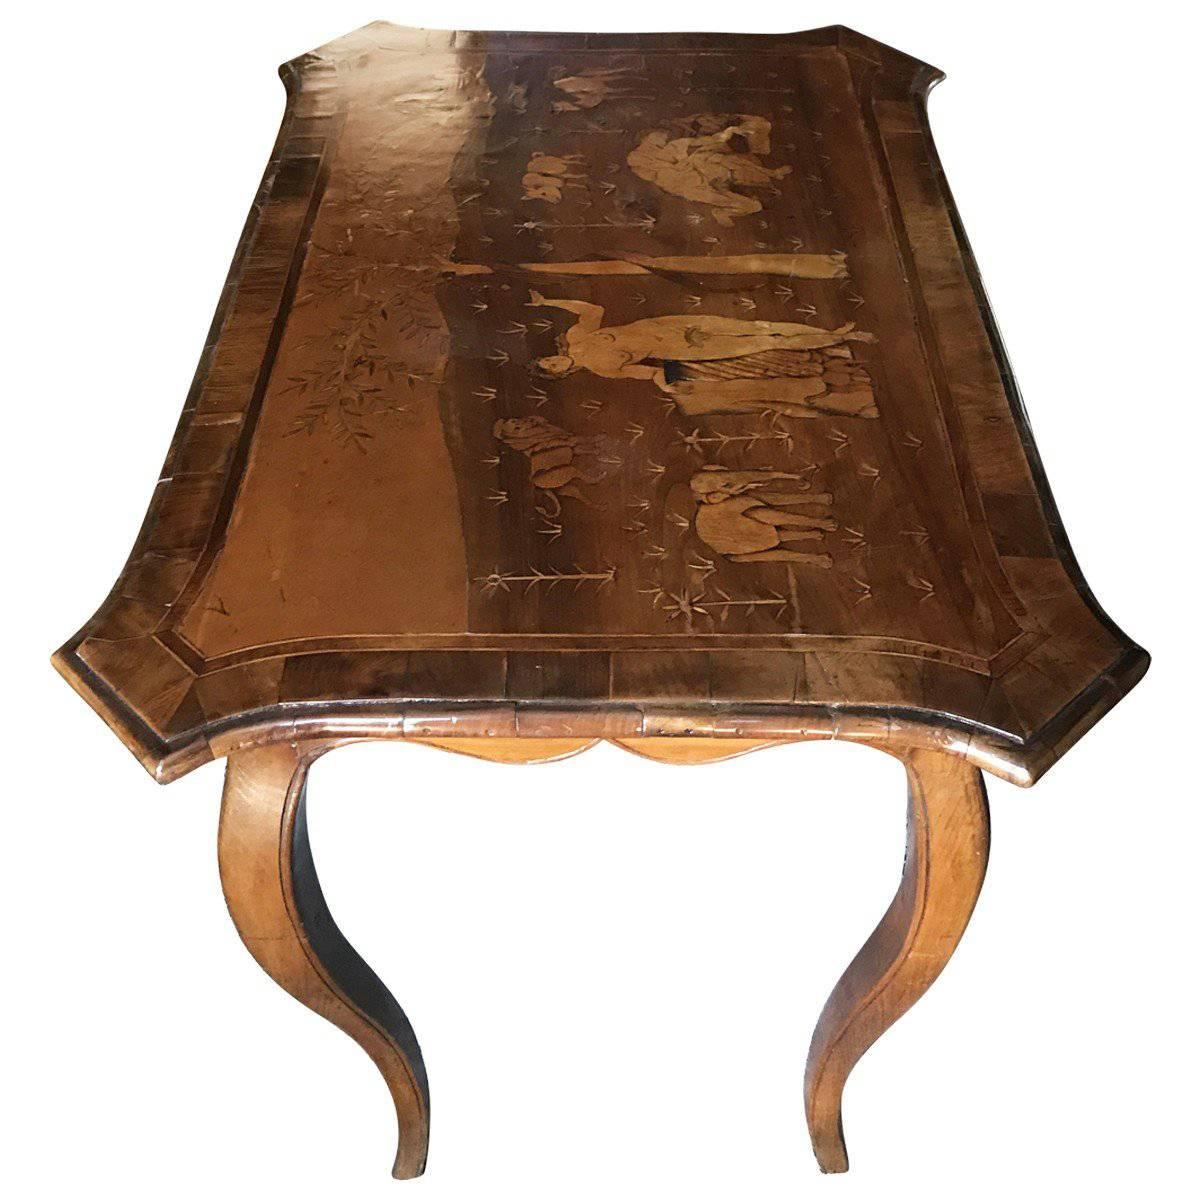 18th Century German Inlaid Walnut Table For Sale